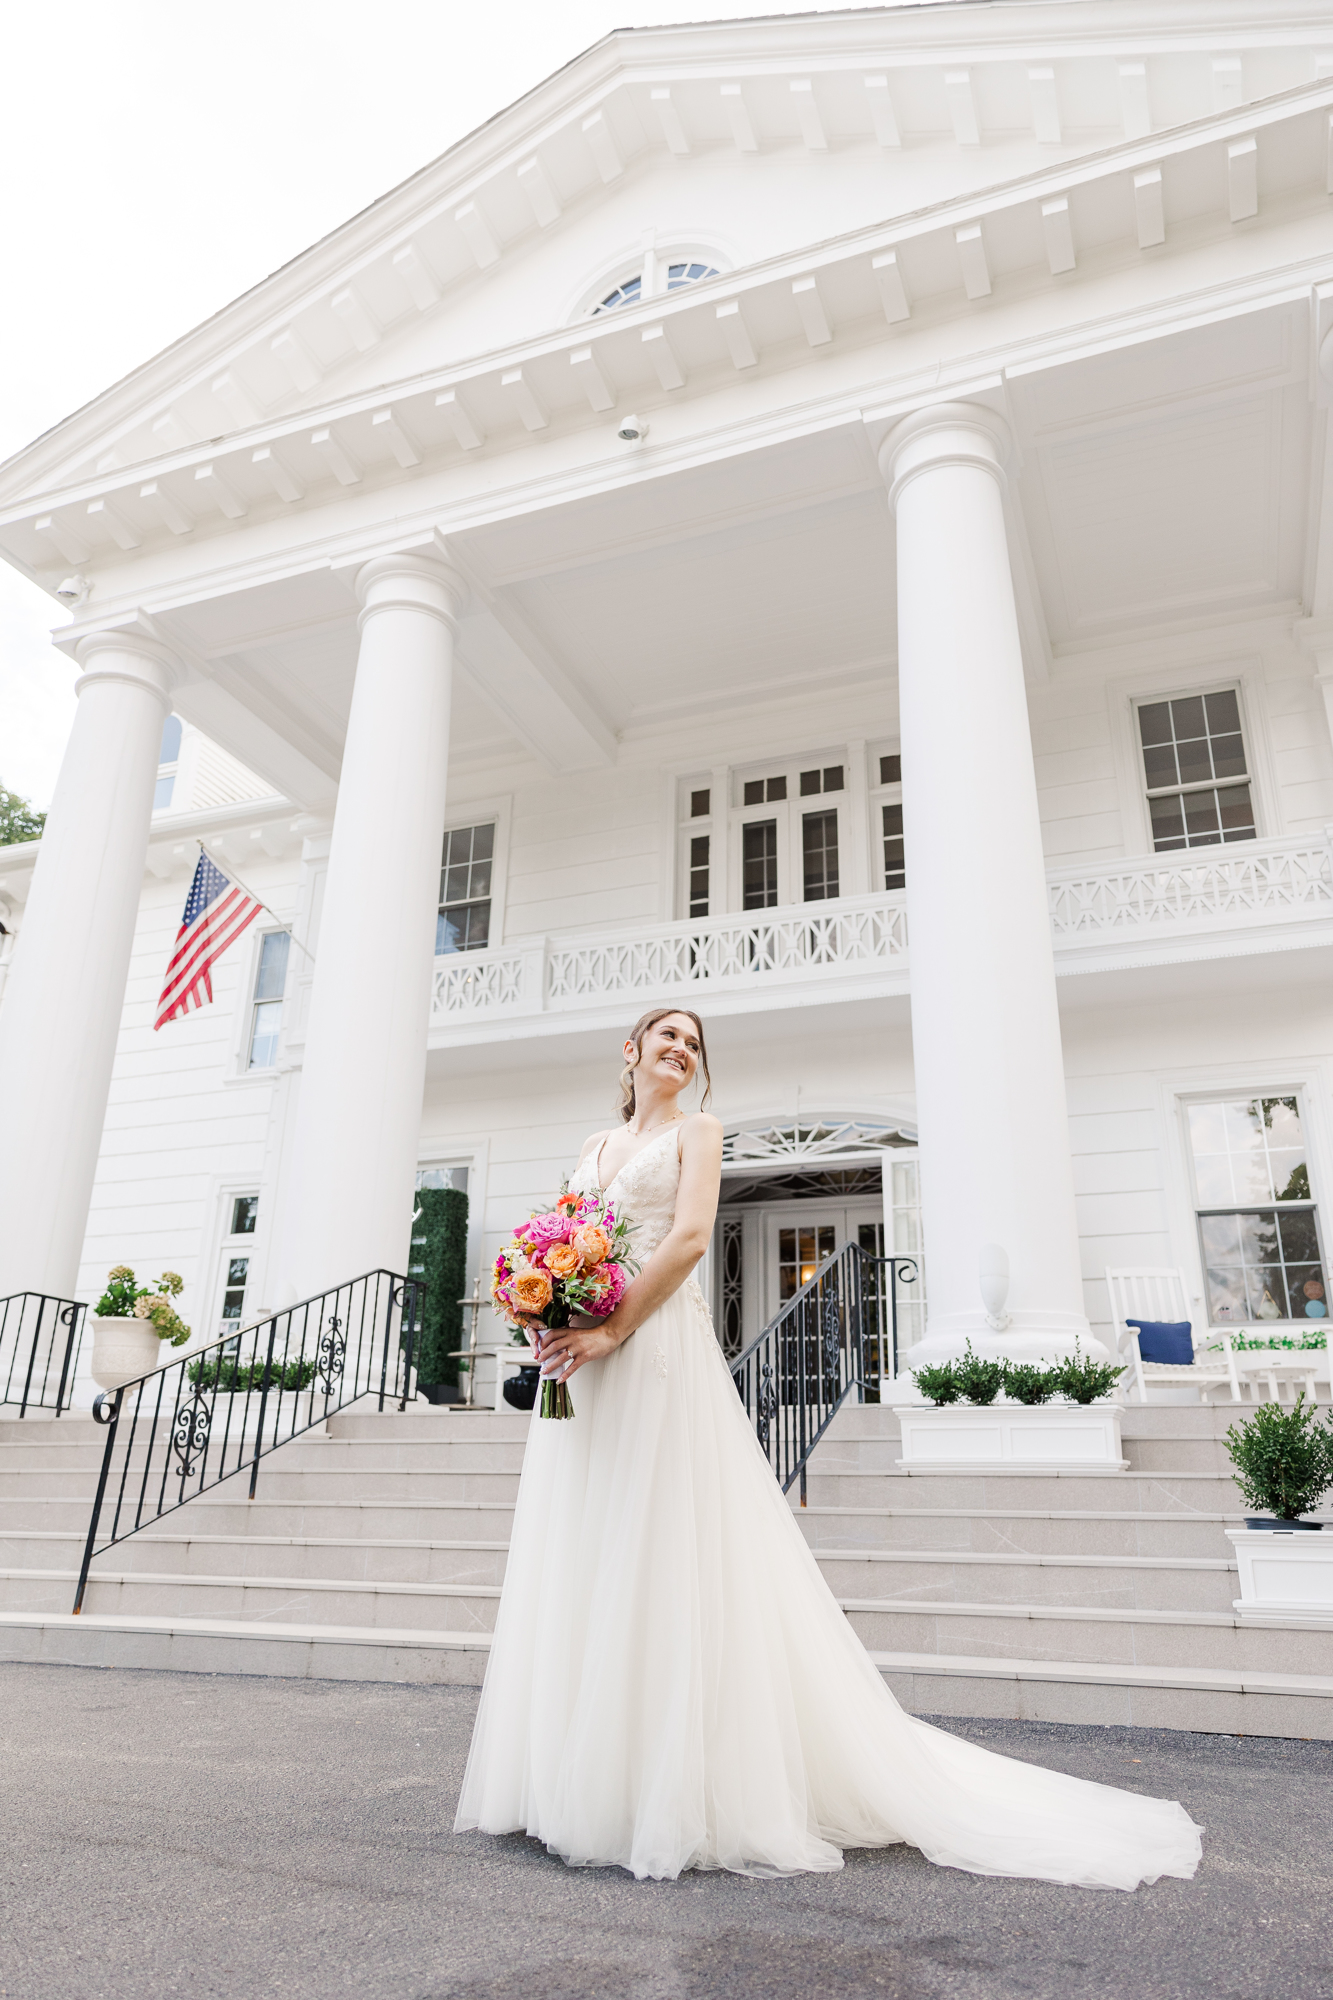 Timeless Wedding at Briarcliff Manor in Westchester County